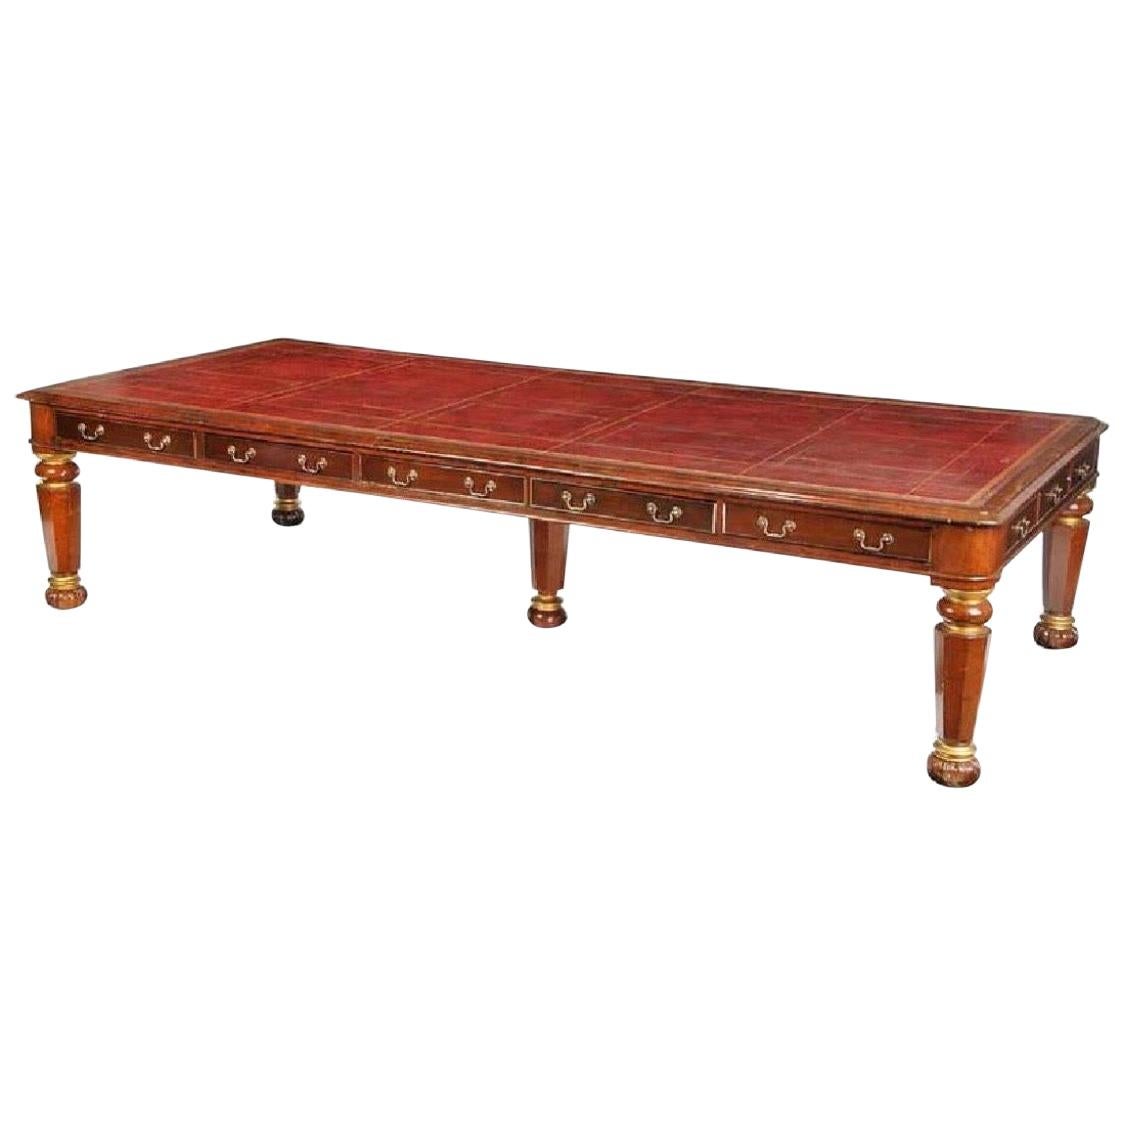 19th Century English Leather Top Mahogany Executive Conference Table For Sale